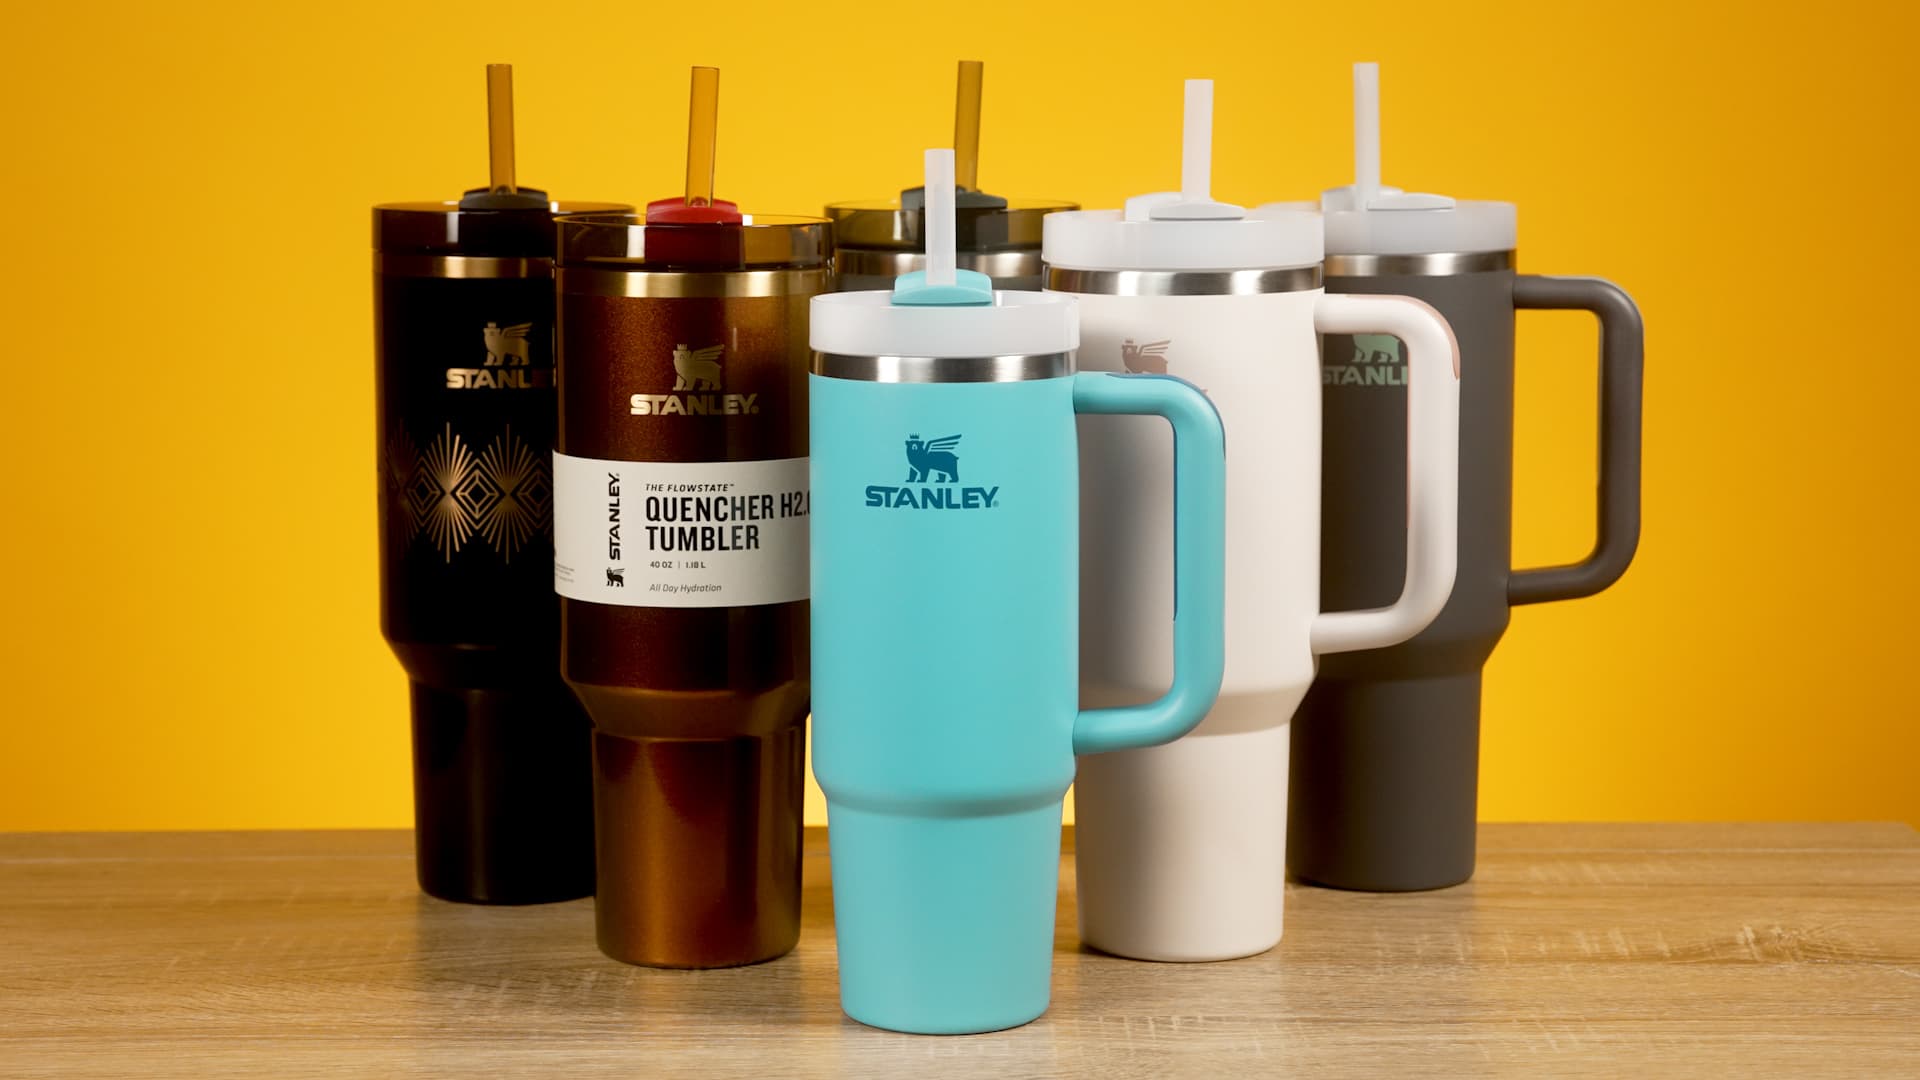 The Stanley Quencher retails for between $35 and $55 and comes in dozens of colors and finishes.